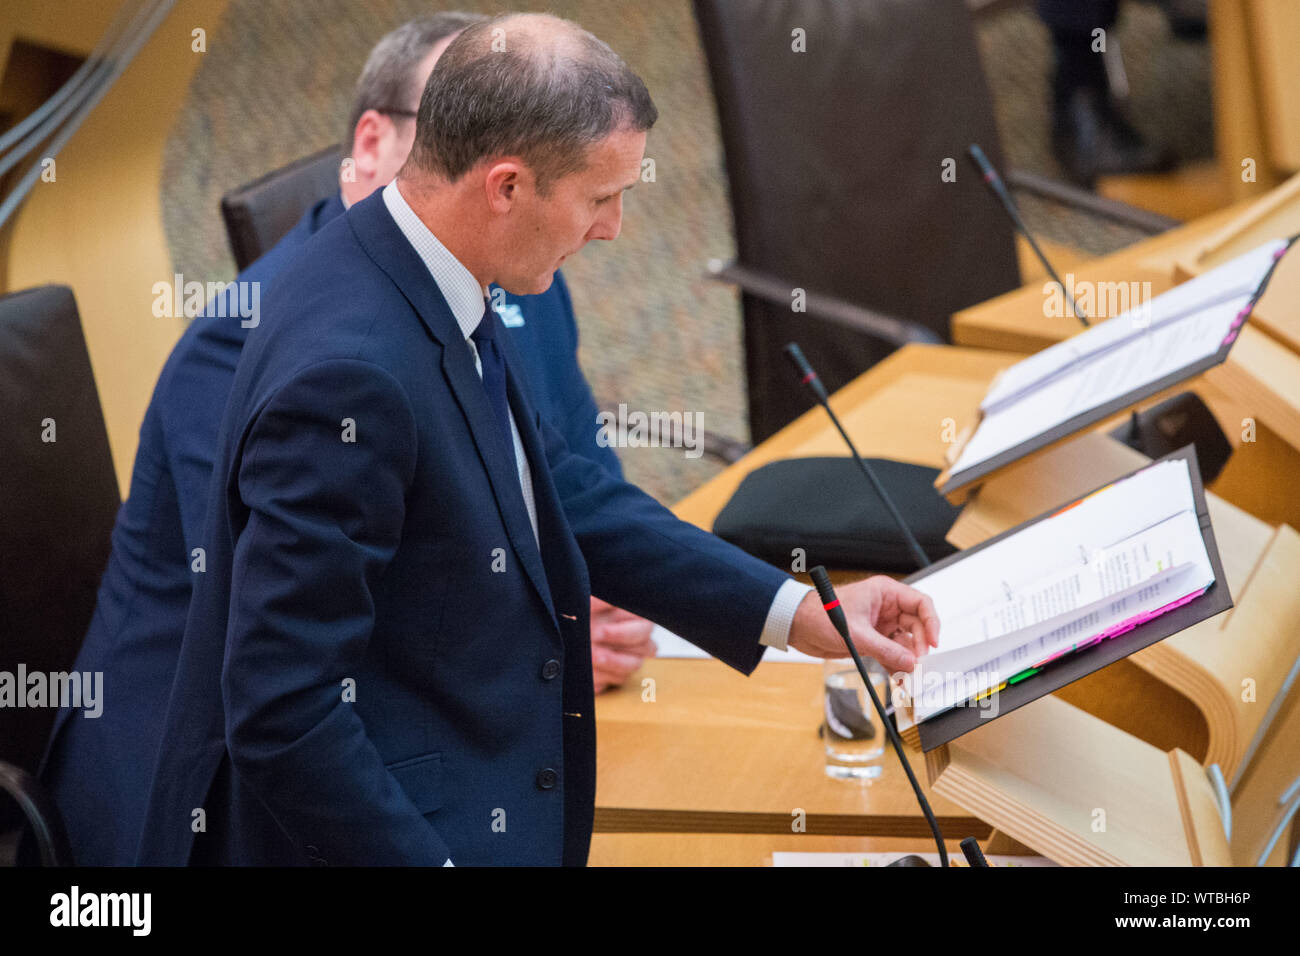 Edinburgh, UK. 5 September 2019. Pictured: Michael Matheson MSP - Cabinet Secretary for Transport, Infrastructure & Connectivity. Scottish Government Debate: Avoiding A No Deal Exit From The EU.  That the Parliament agrees that the UK should in no circumstances leave the EU on a no-deal basis, and condemns the Prime Minister’s suspension of the UK Parliament from as early as 9 September until 14 October 2019. The result of the division is: For 87, Against 28, Abstentions 0. Colin Fisher/CDFIMAGES.COM Stock Photo